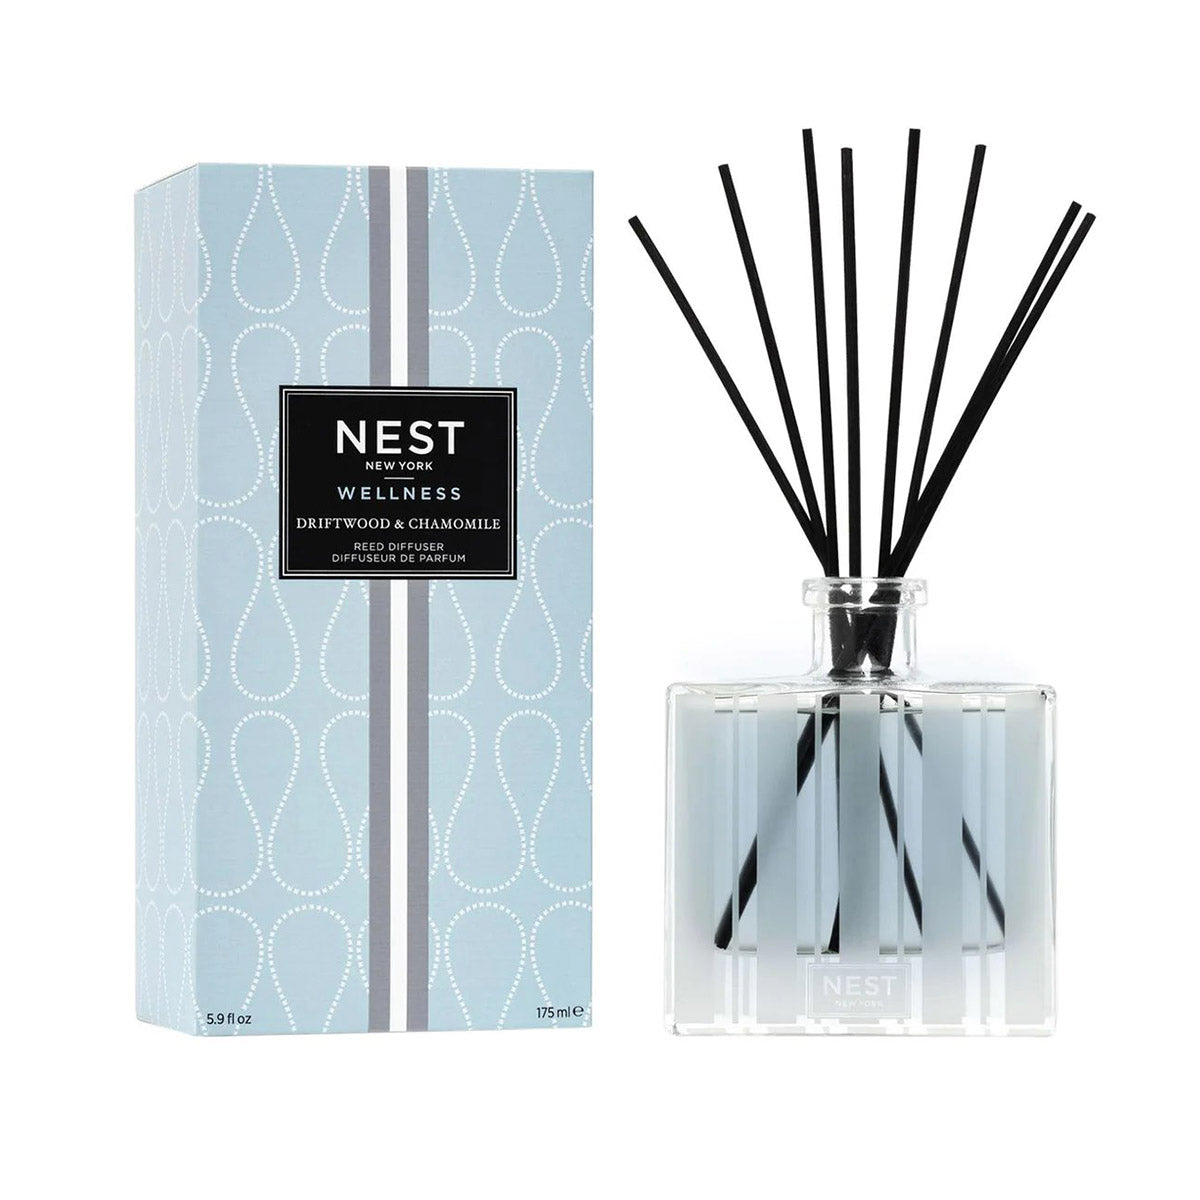 Nest Fragrances Driftwood & Chamomile Reed Diffuser